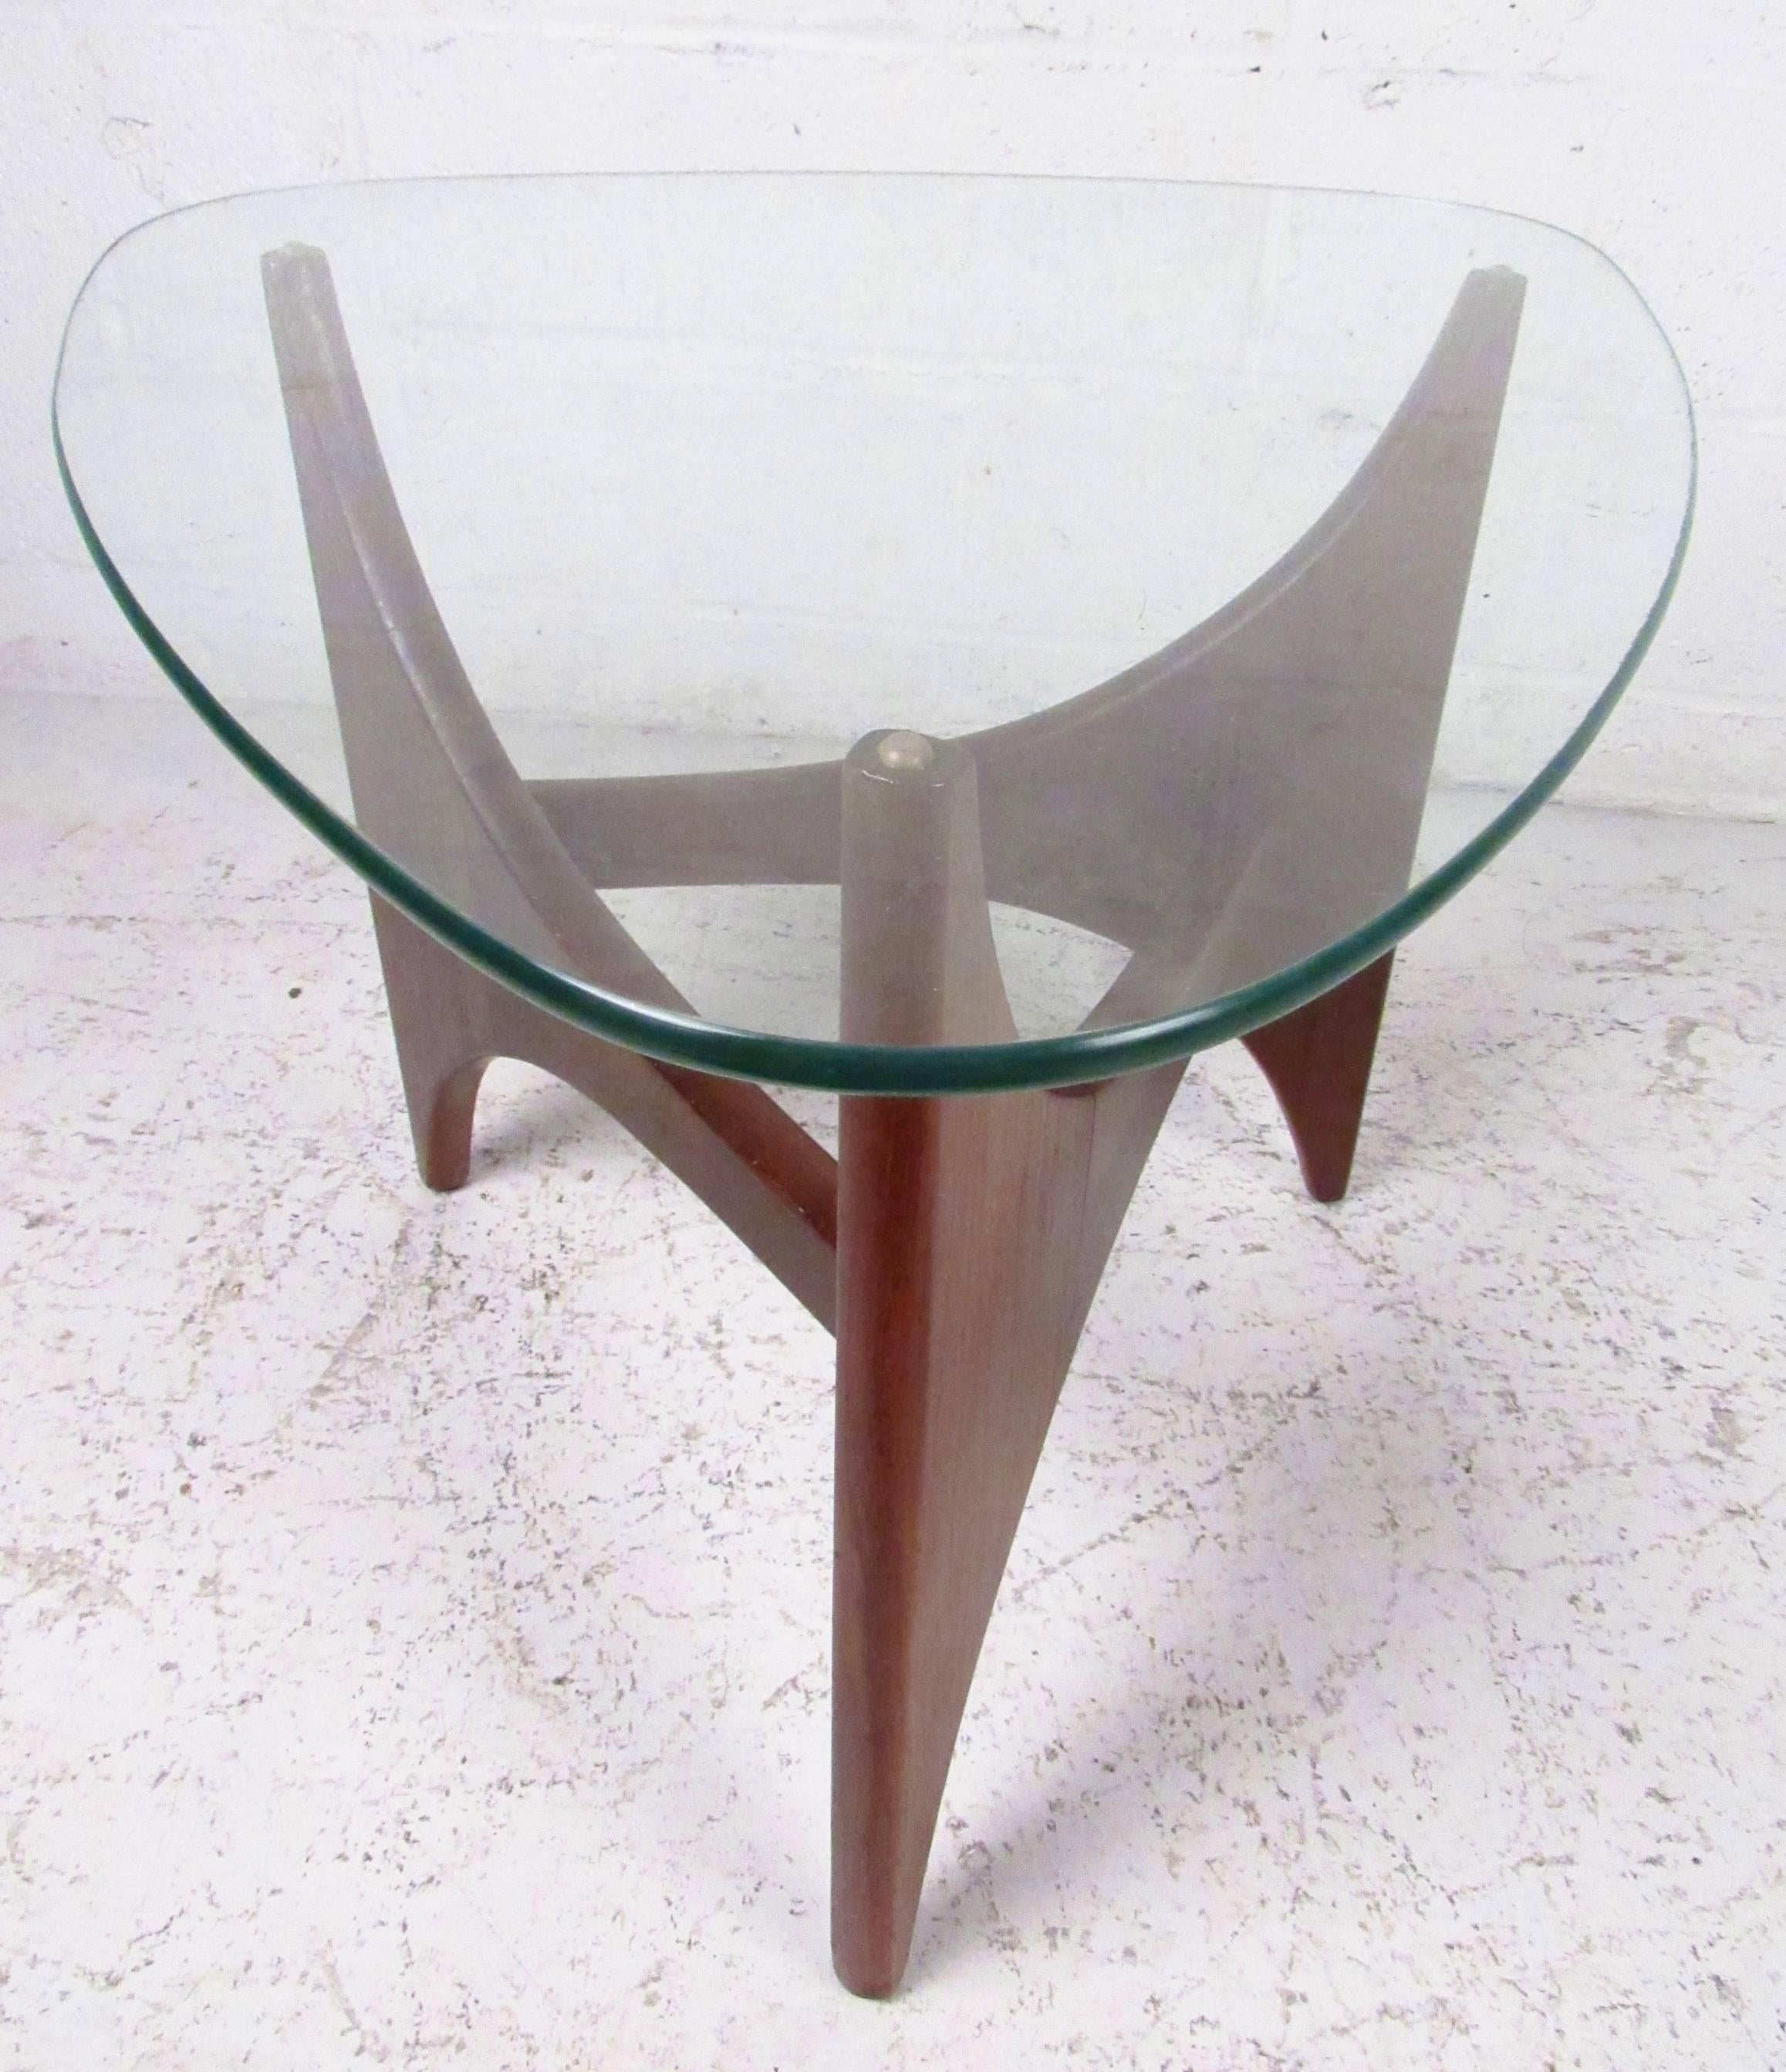 Highly sculpted walnut side table by for Craft Associates. Kagan style formed base with triangle glass top.

(Please confirm item location - NY or NJ - with dealer)
